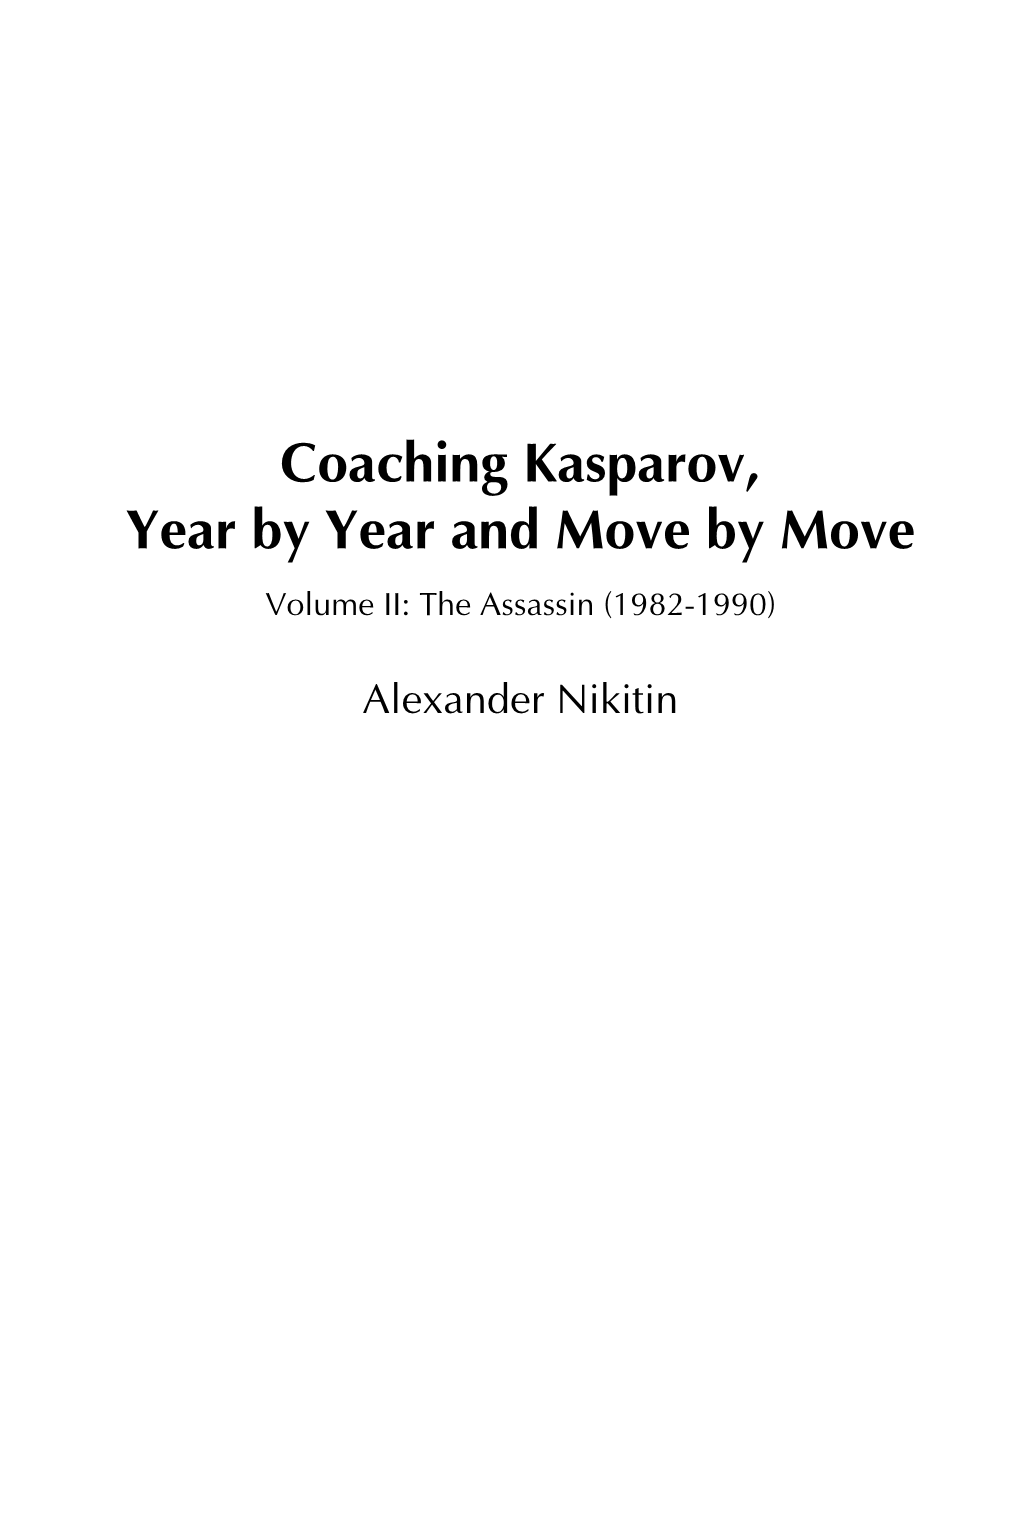 Coaching Kasparov, Year by Year and Move by Move Volume II: the Assassin (1982-1990)